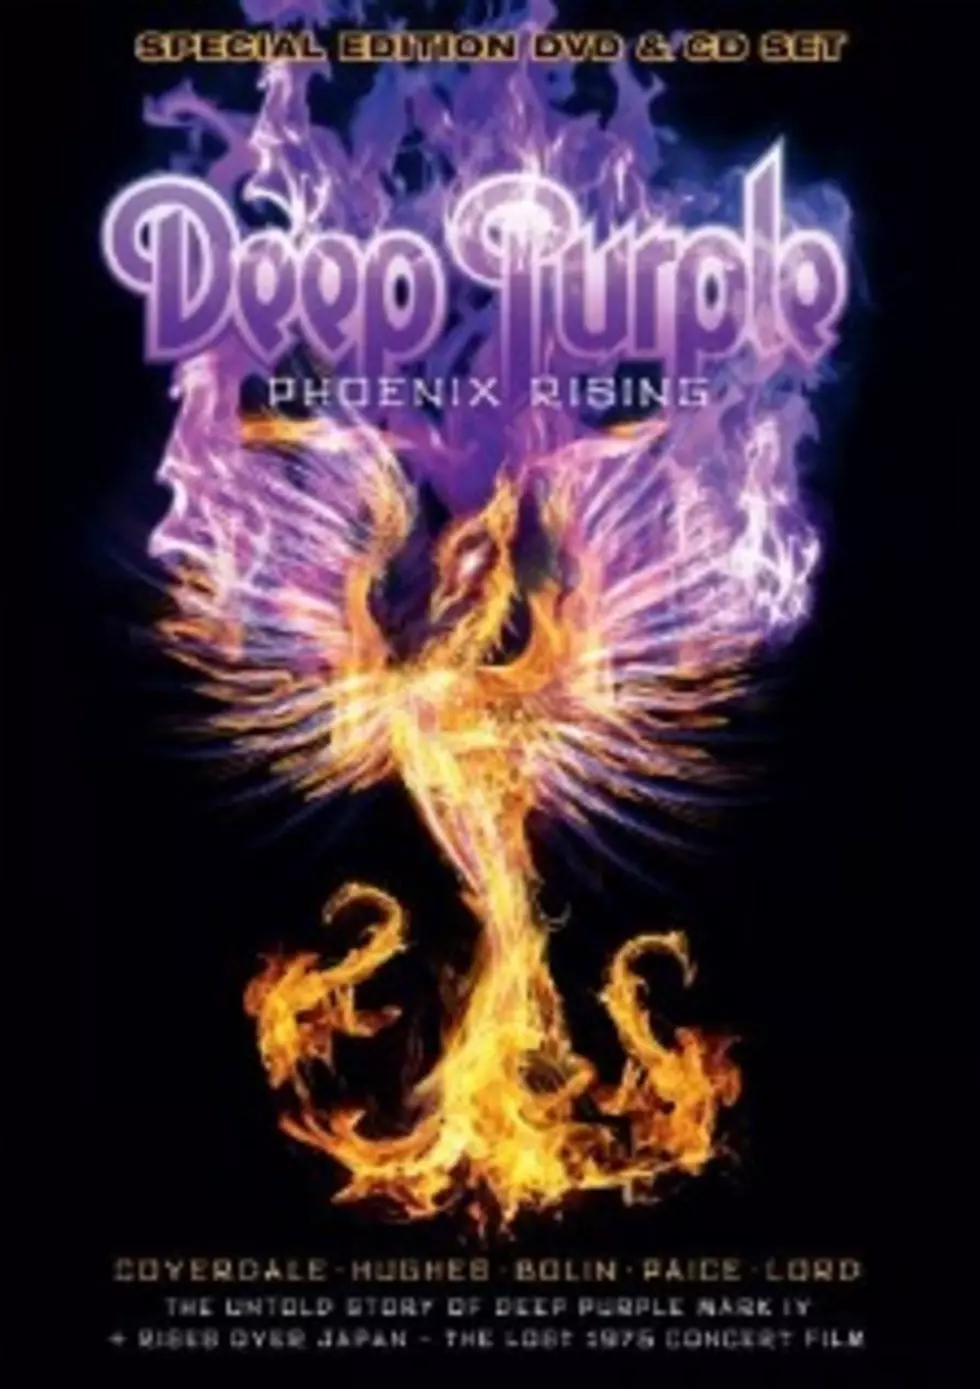 Deep Purple Coming Soon To A DVD Player Near You